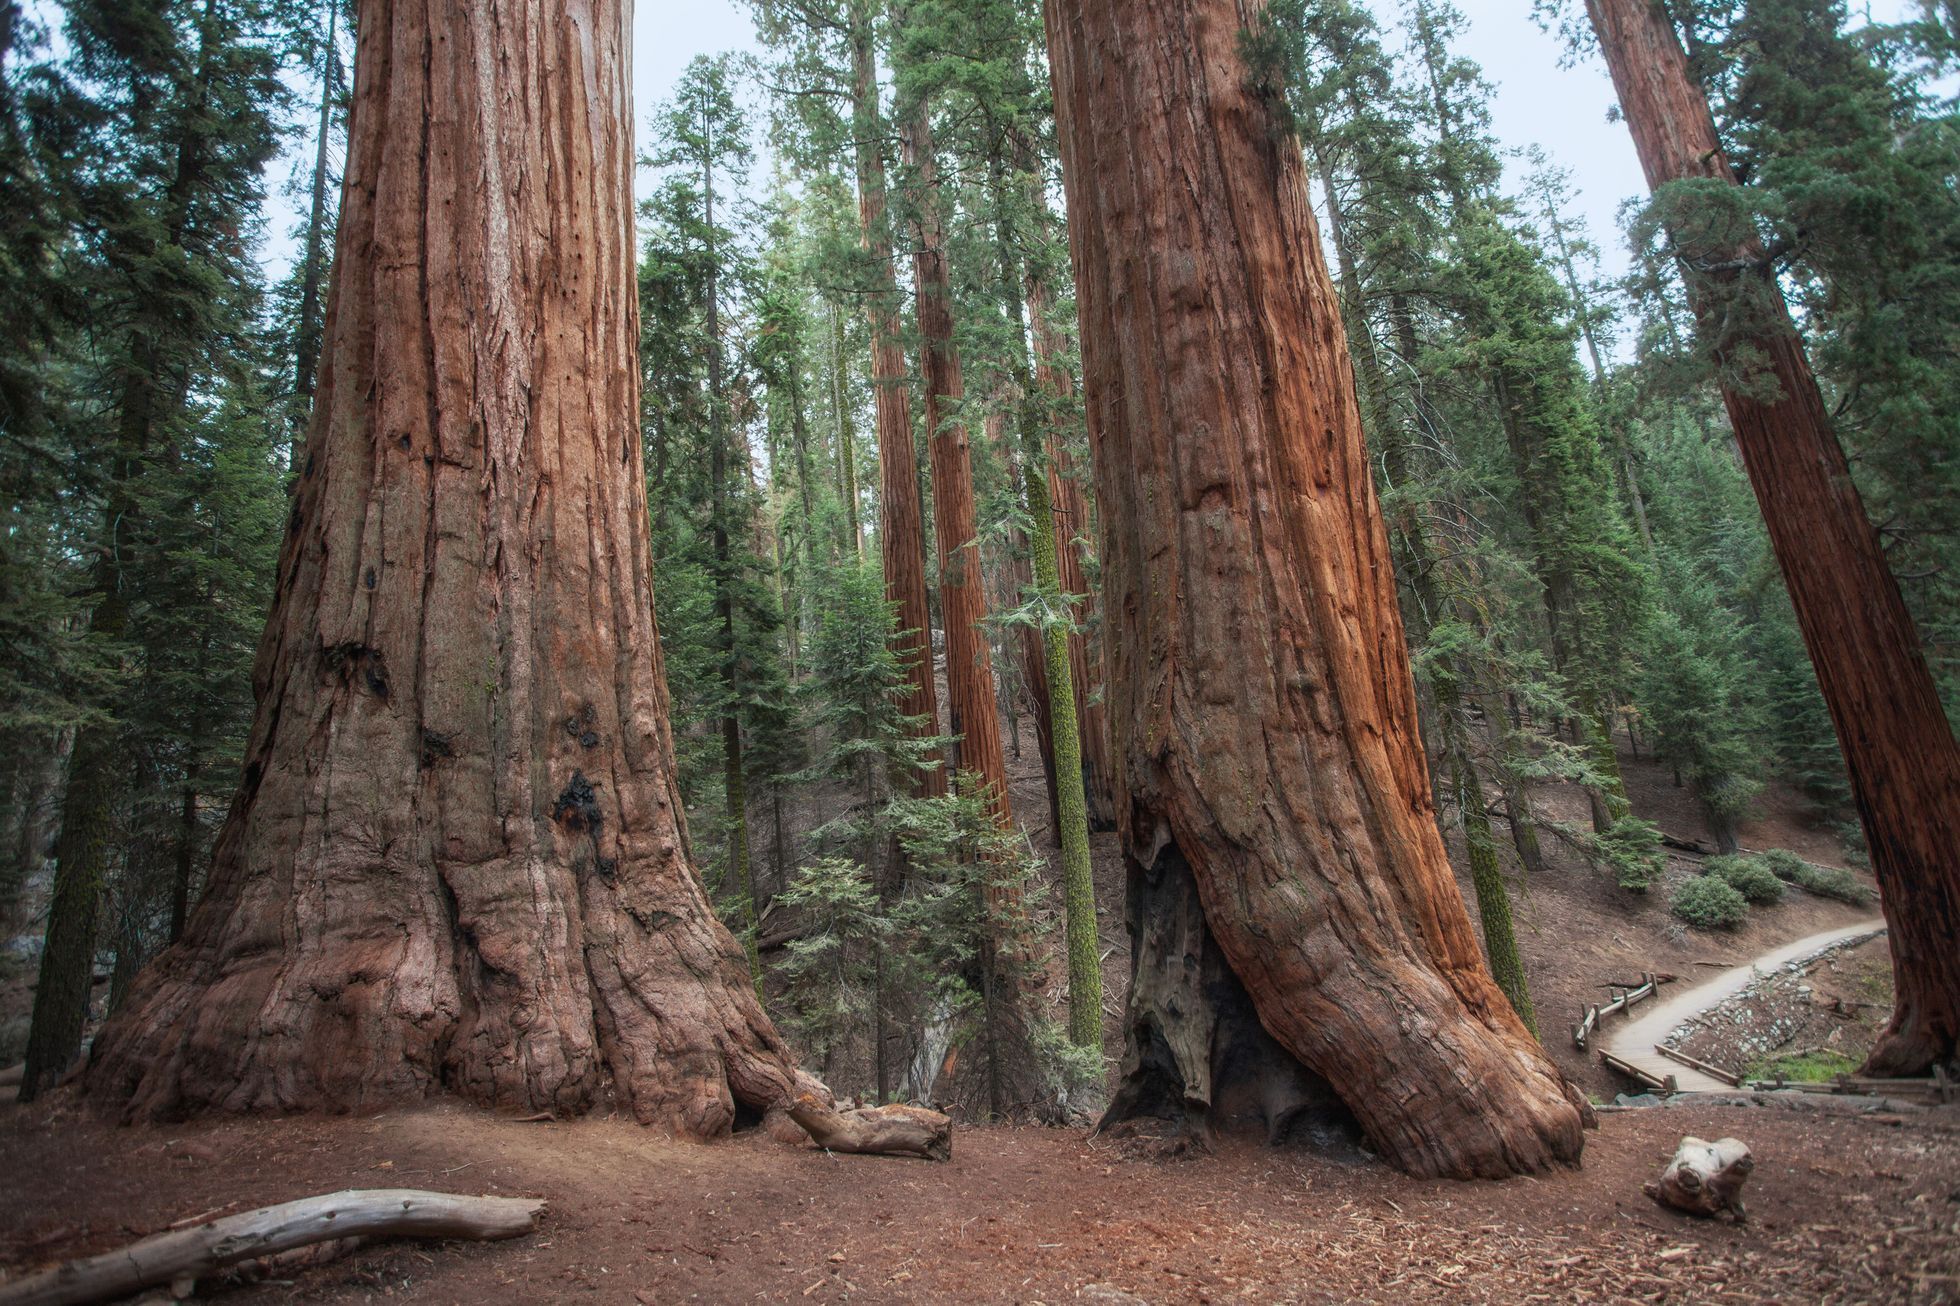 The Giant Sequoia National Monument